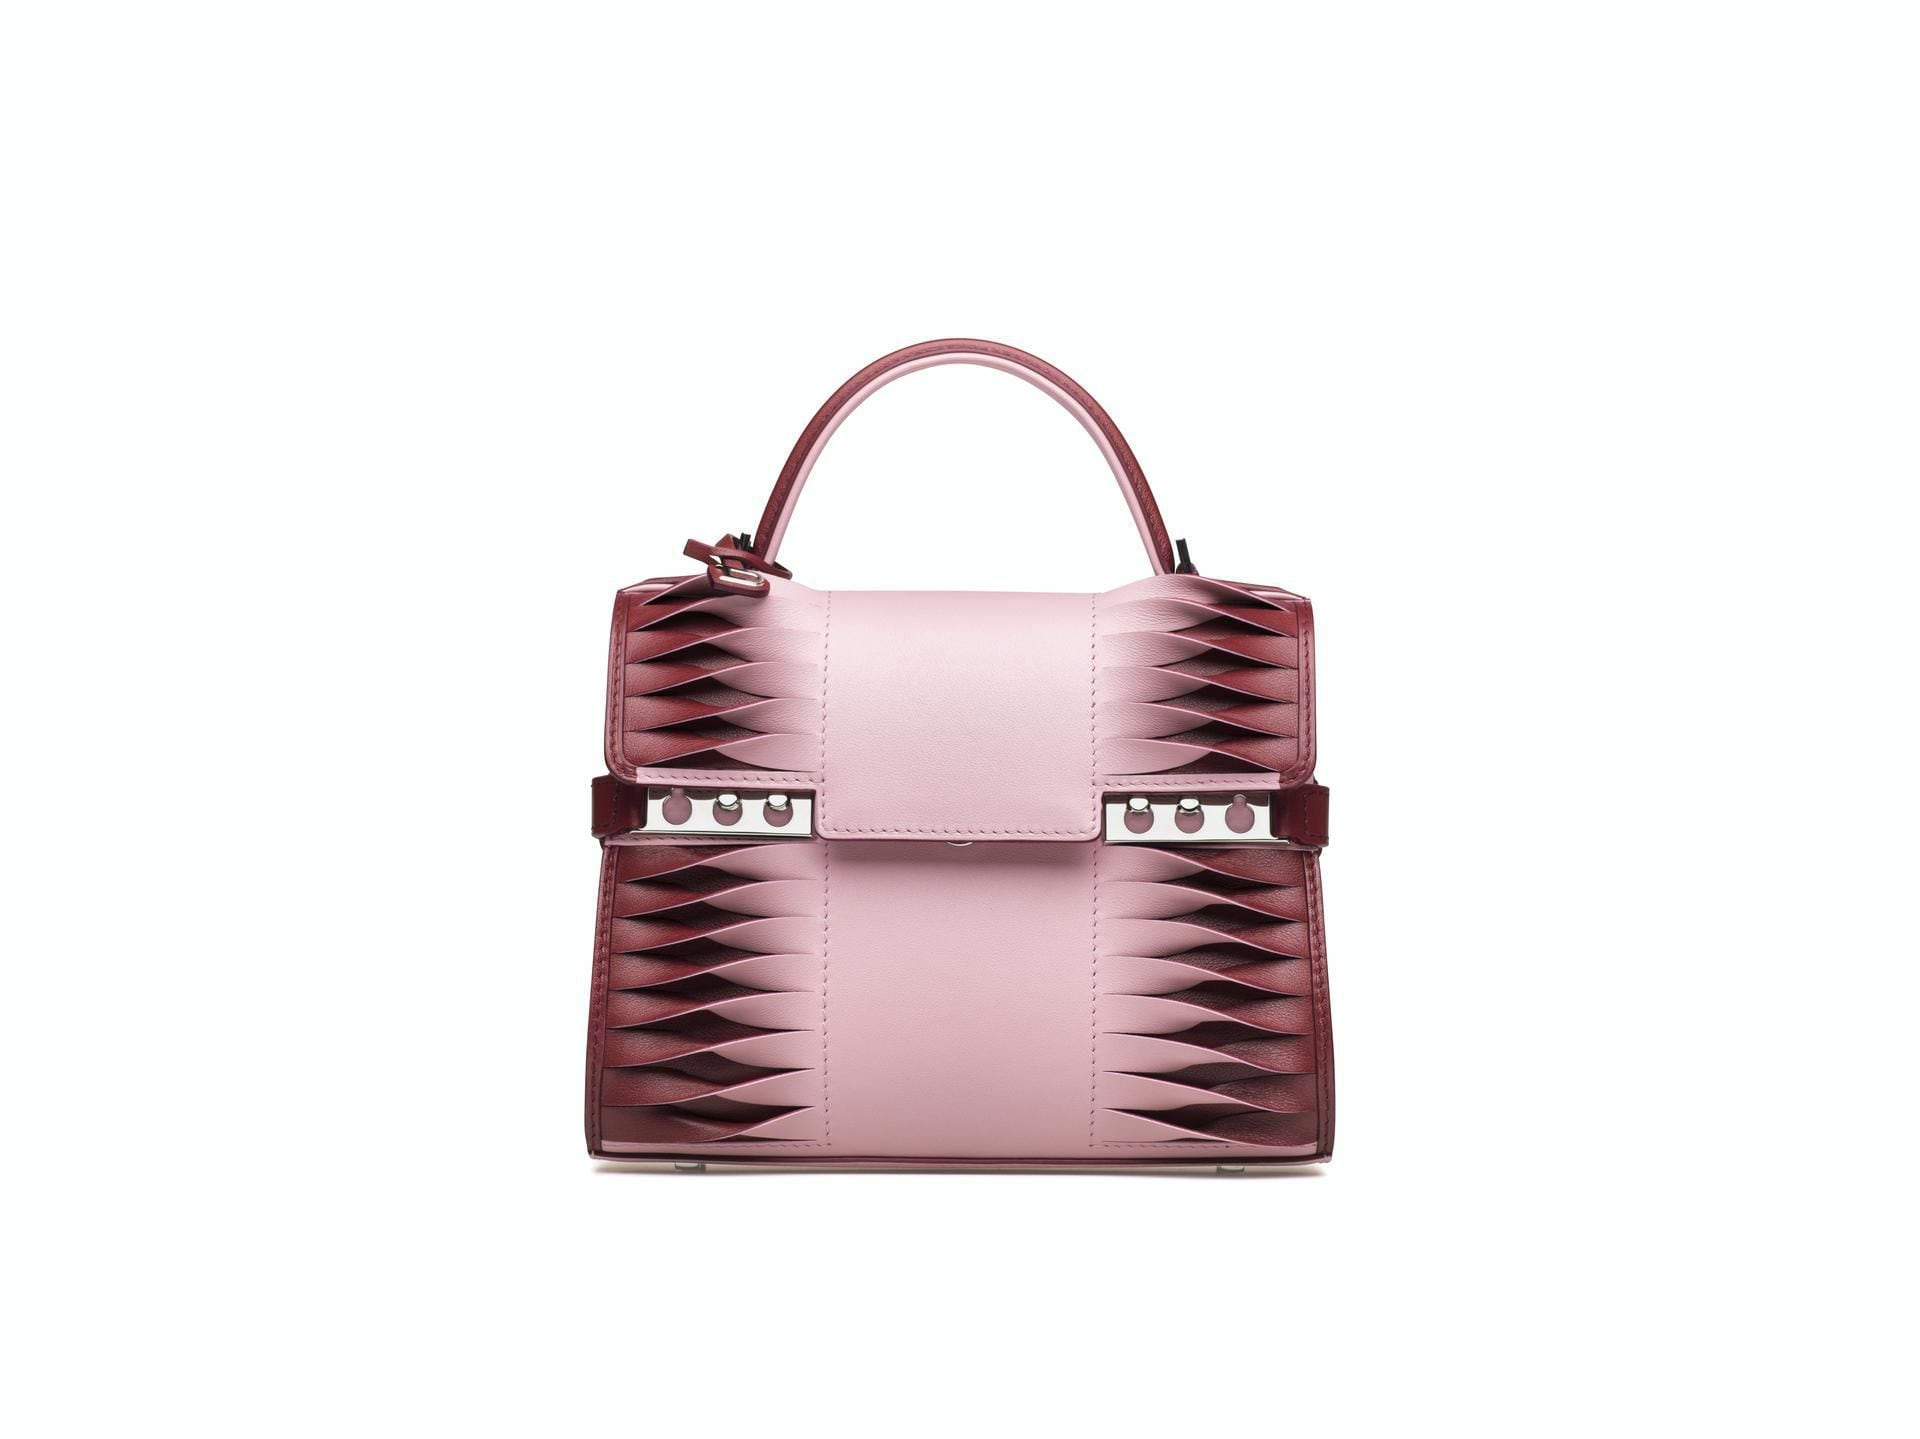 Delvaux: the luxury leather handbag brand that makes leather look